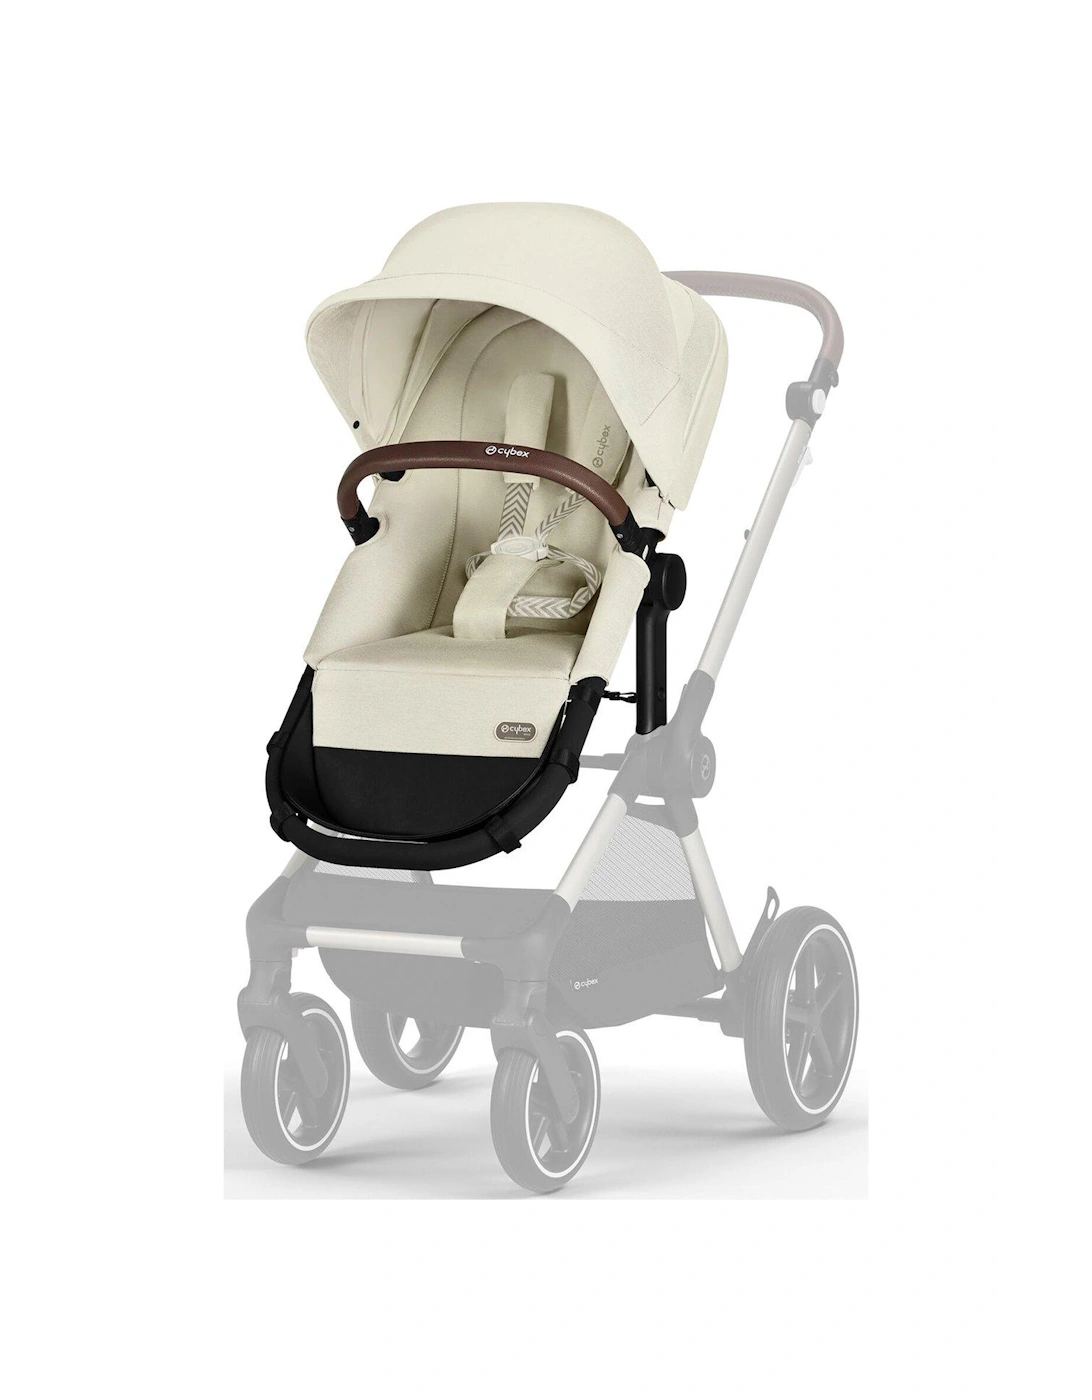 EOS Luxury 2-in-1 Pushchair Bundle with R129 Aton B2 i-Size Car Seat (Leatherette Handle)